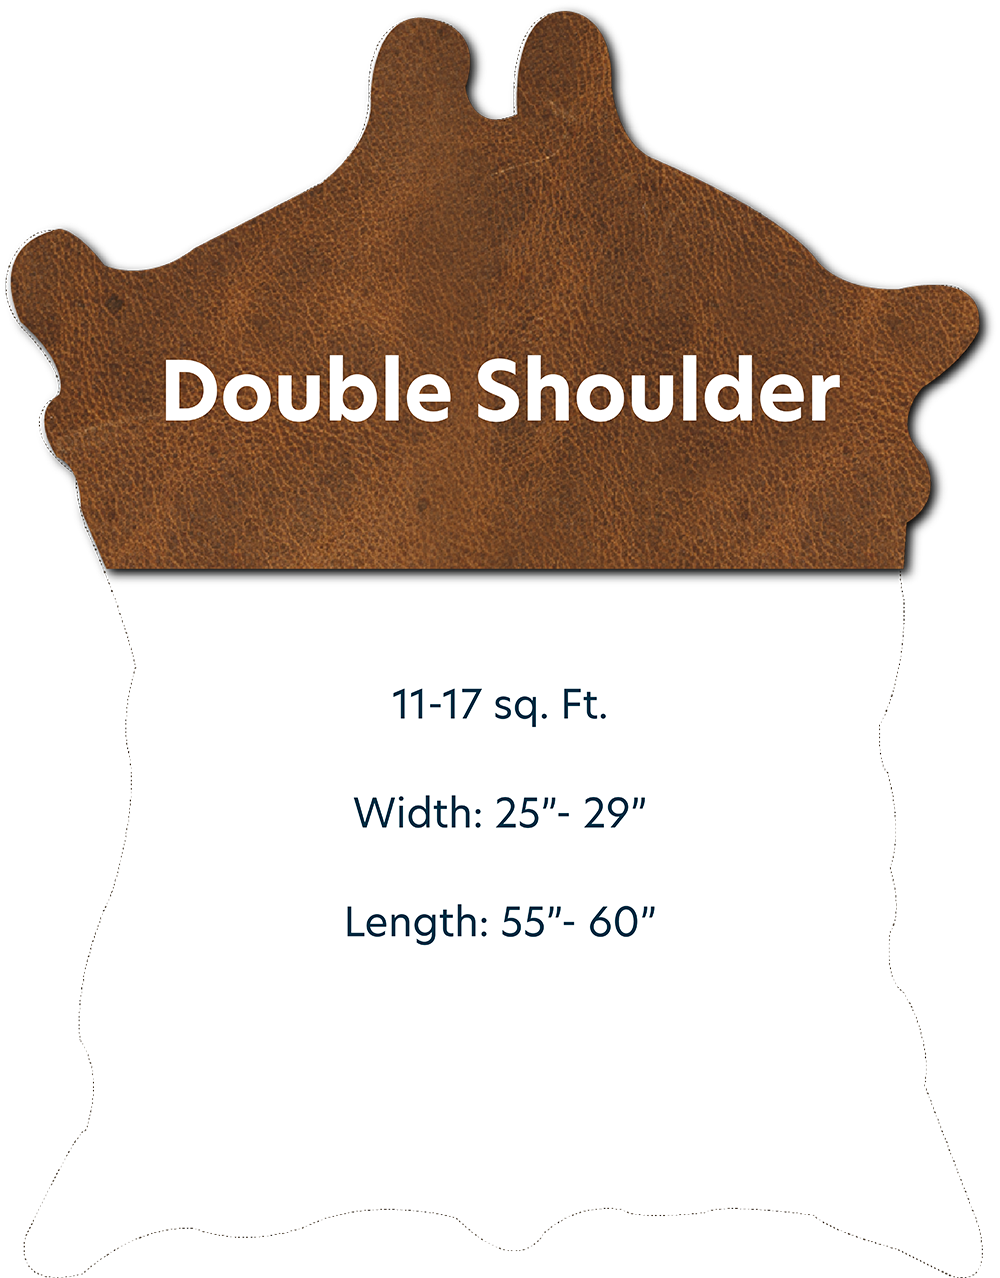 Double Shoulder with Dimensions